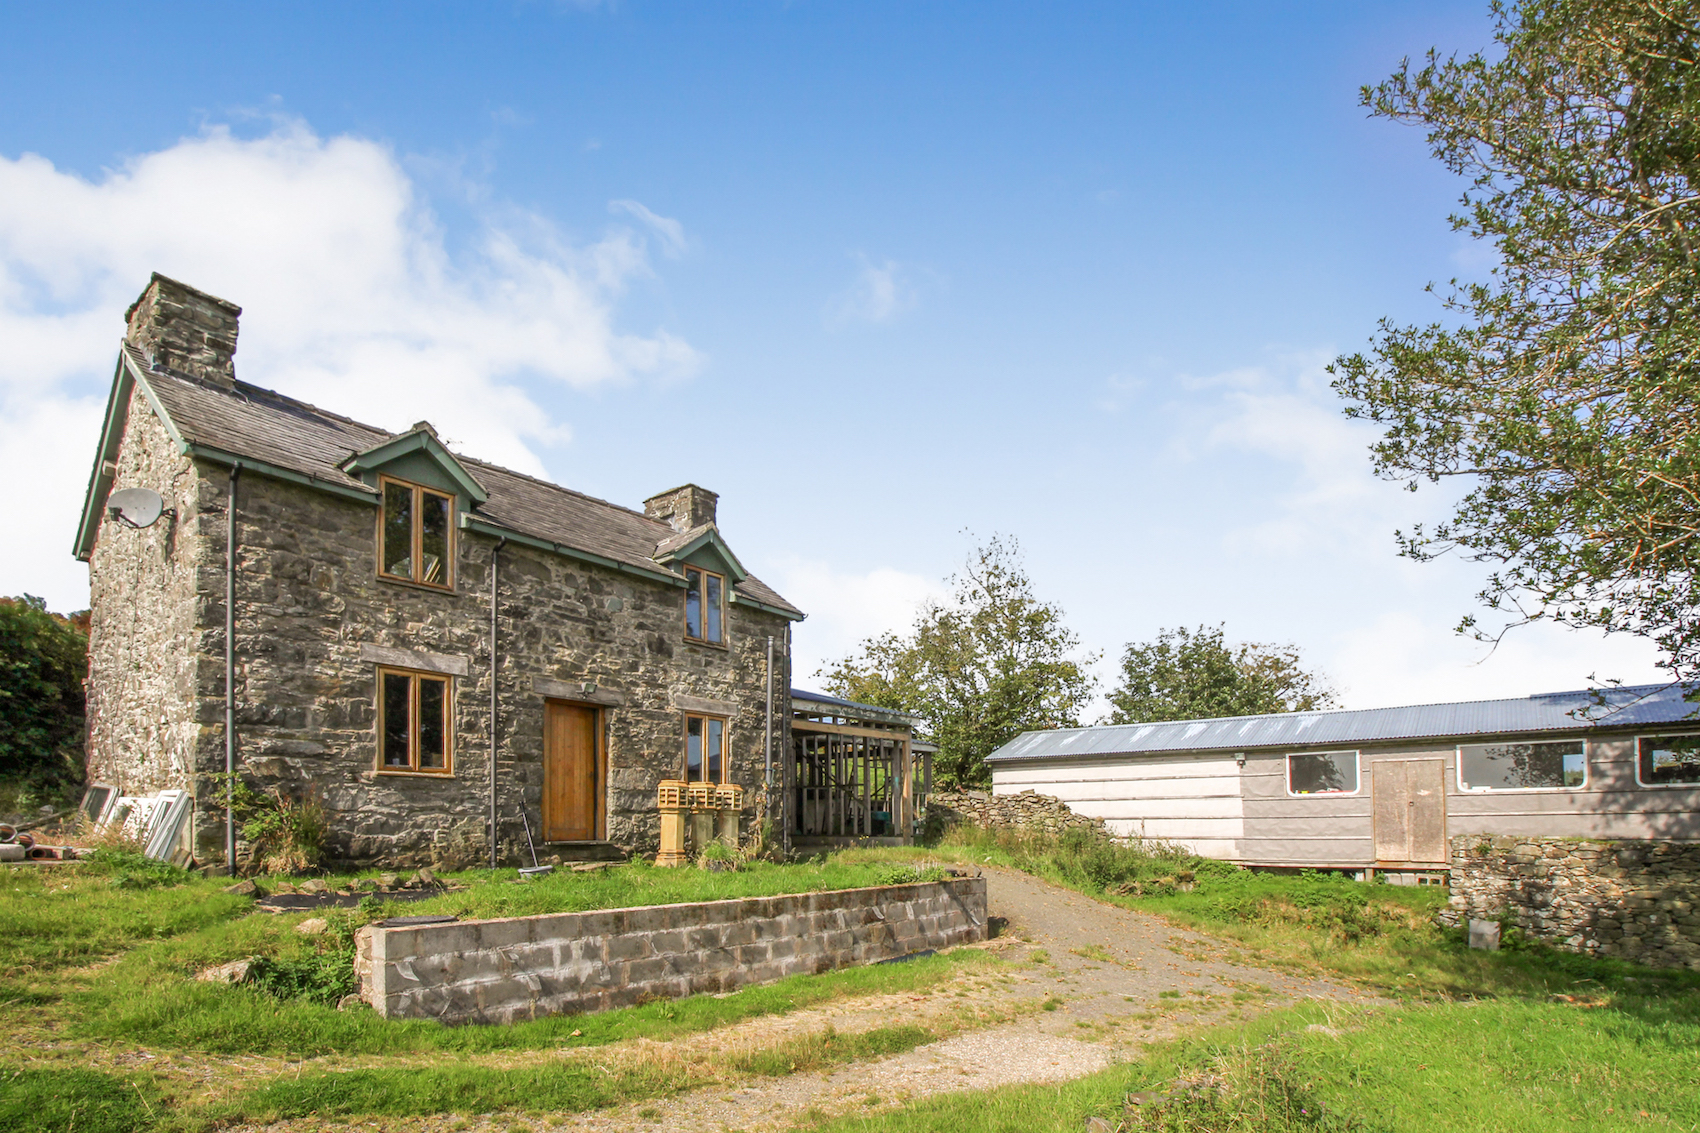 Off-grid lifestyle complete with stunning stone cottage renovation